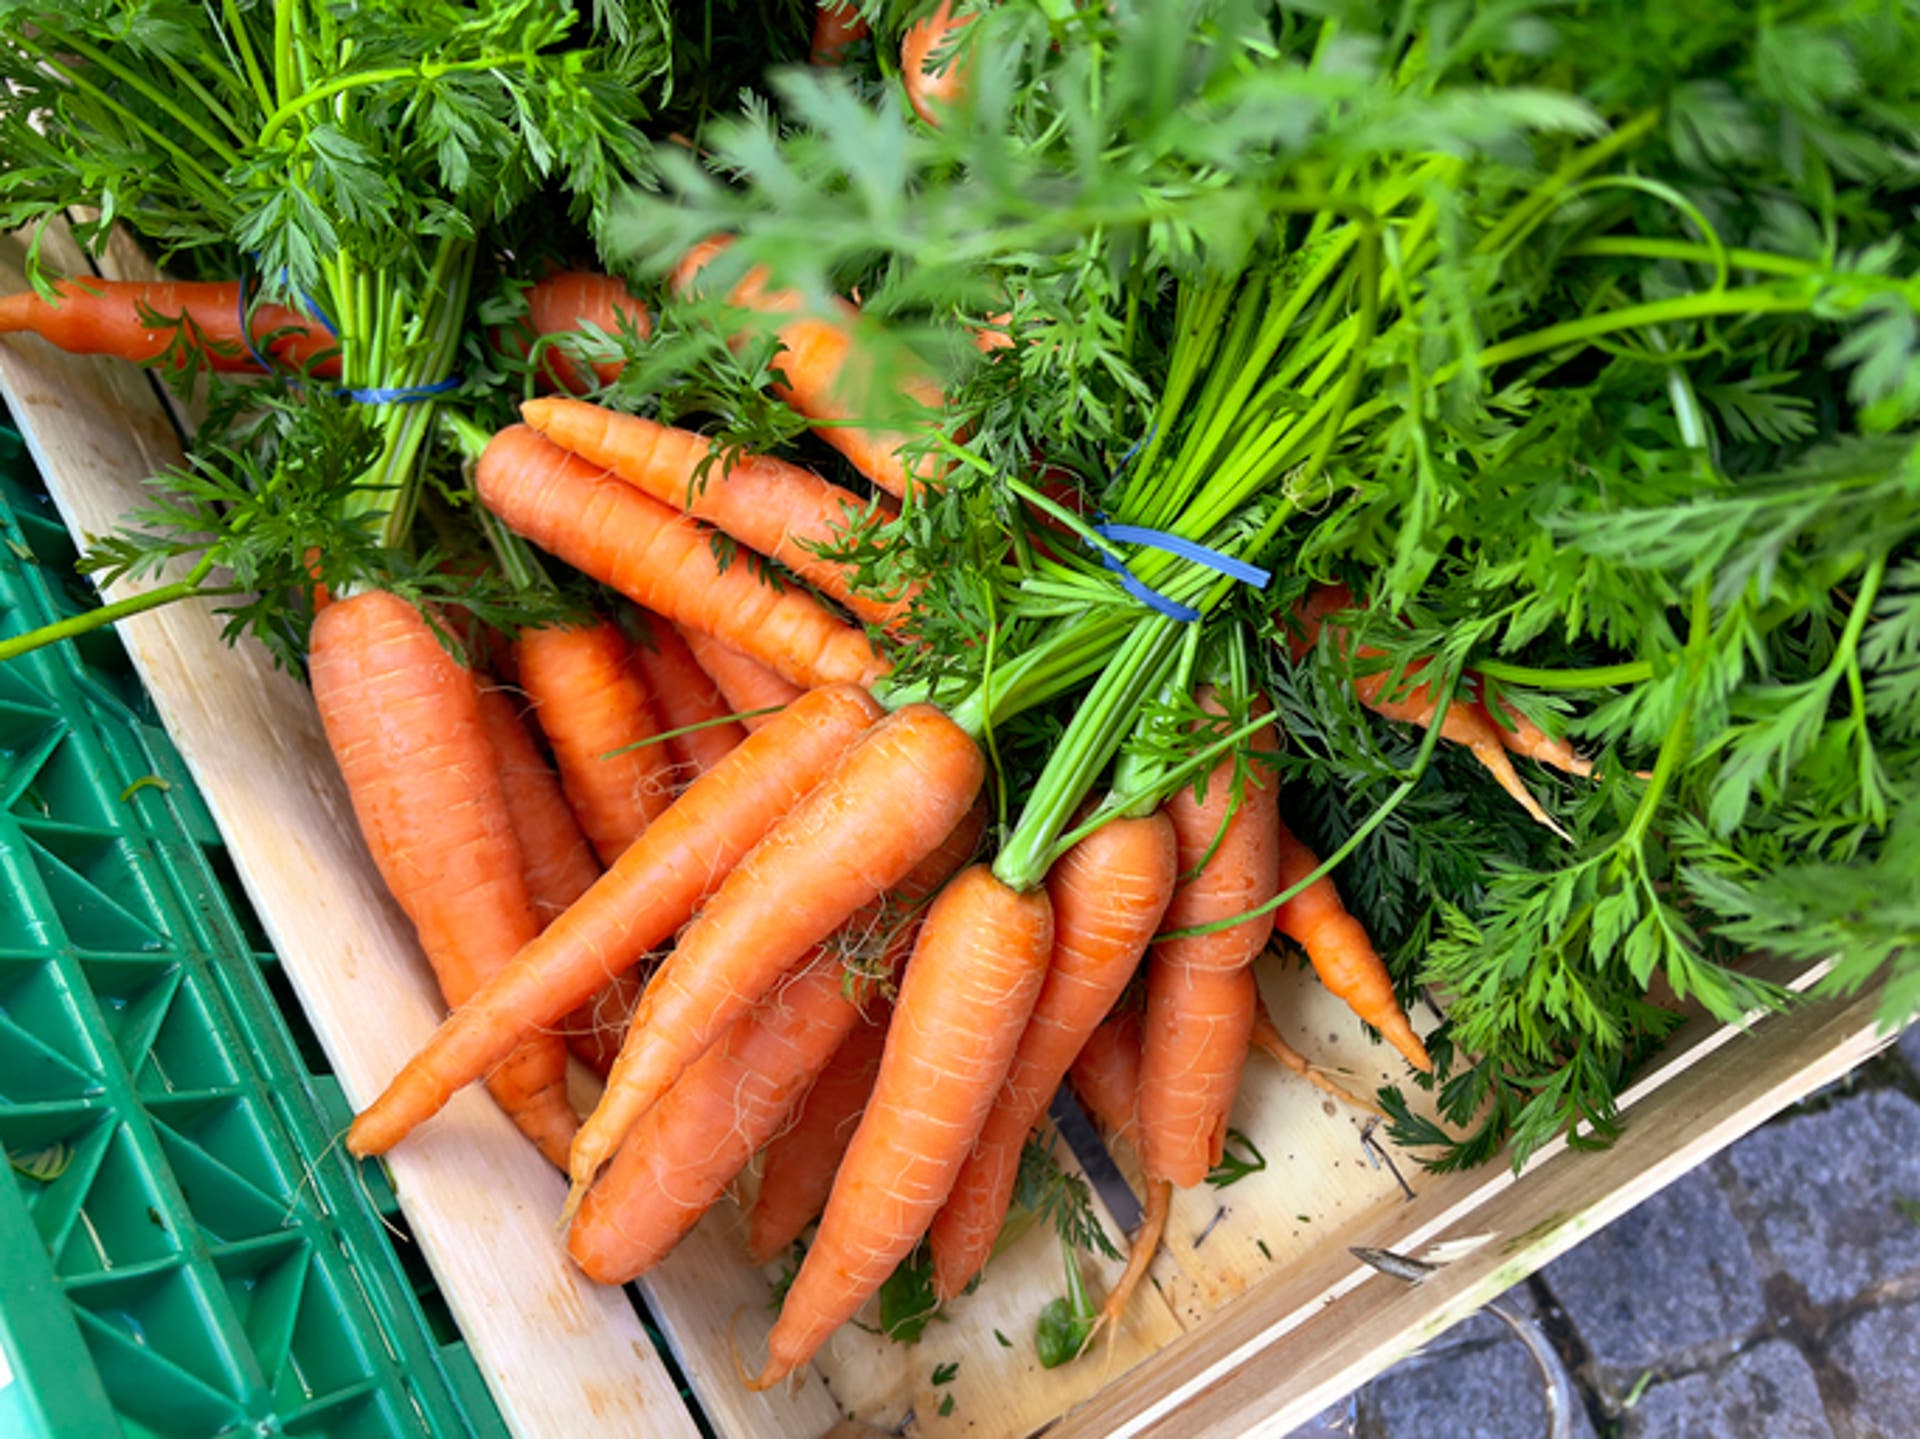  photo of a bunch of carrots in a market 